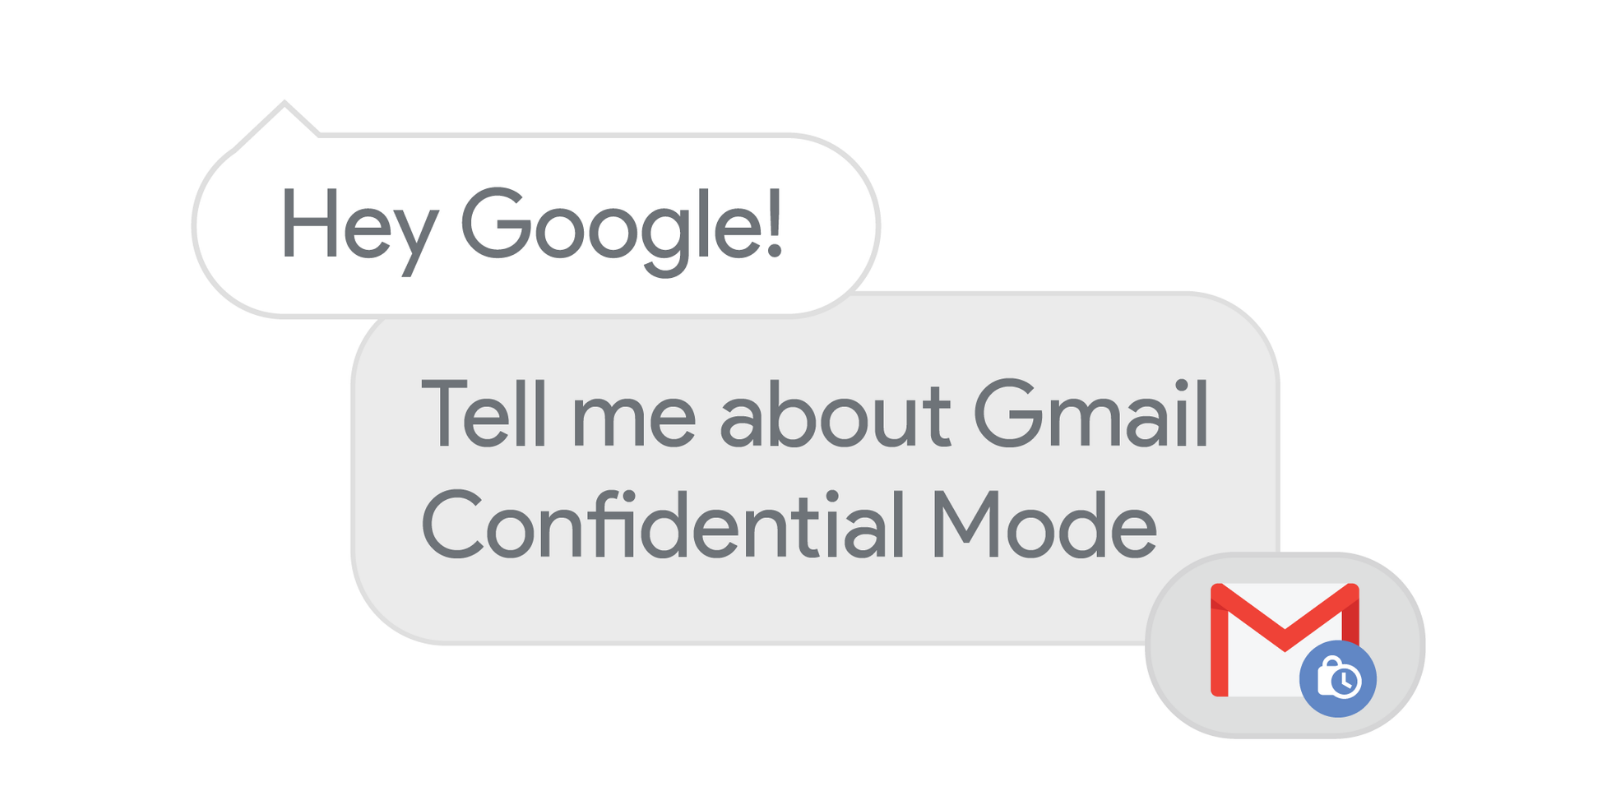 hey-google-confidential-mode.png